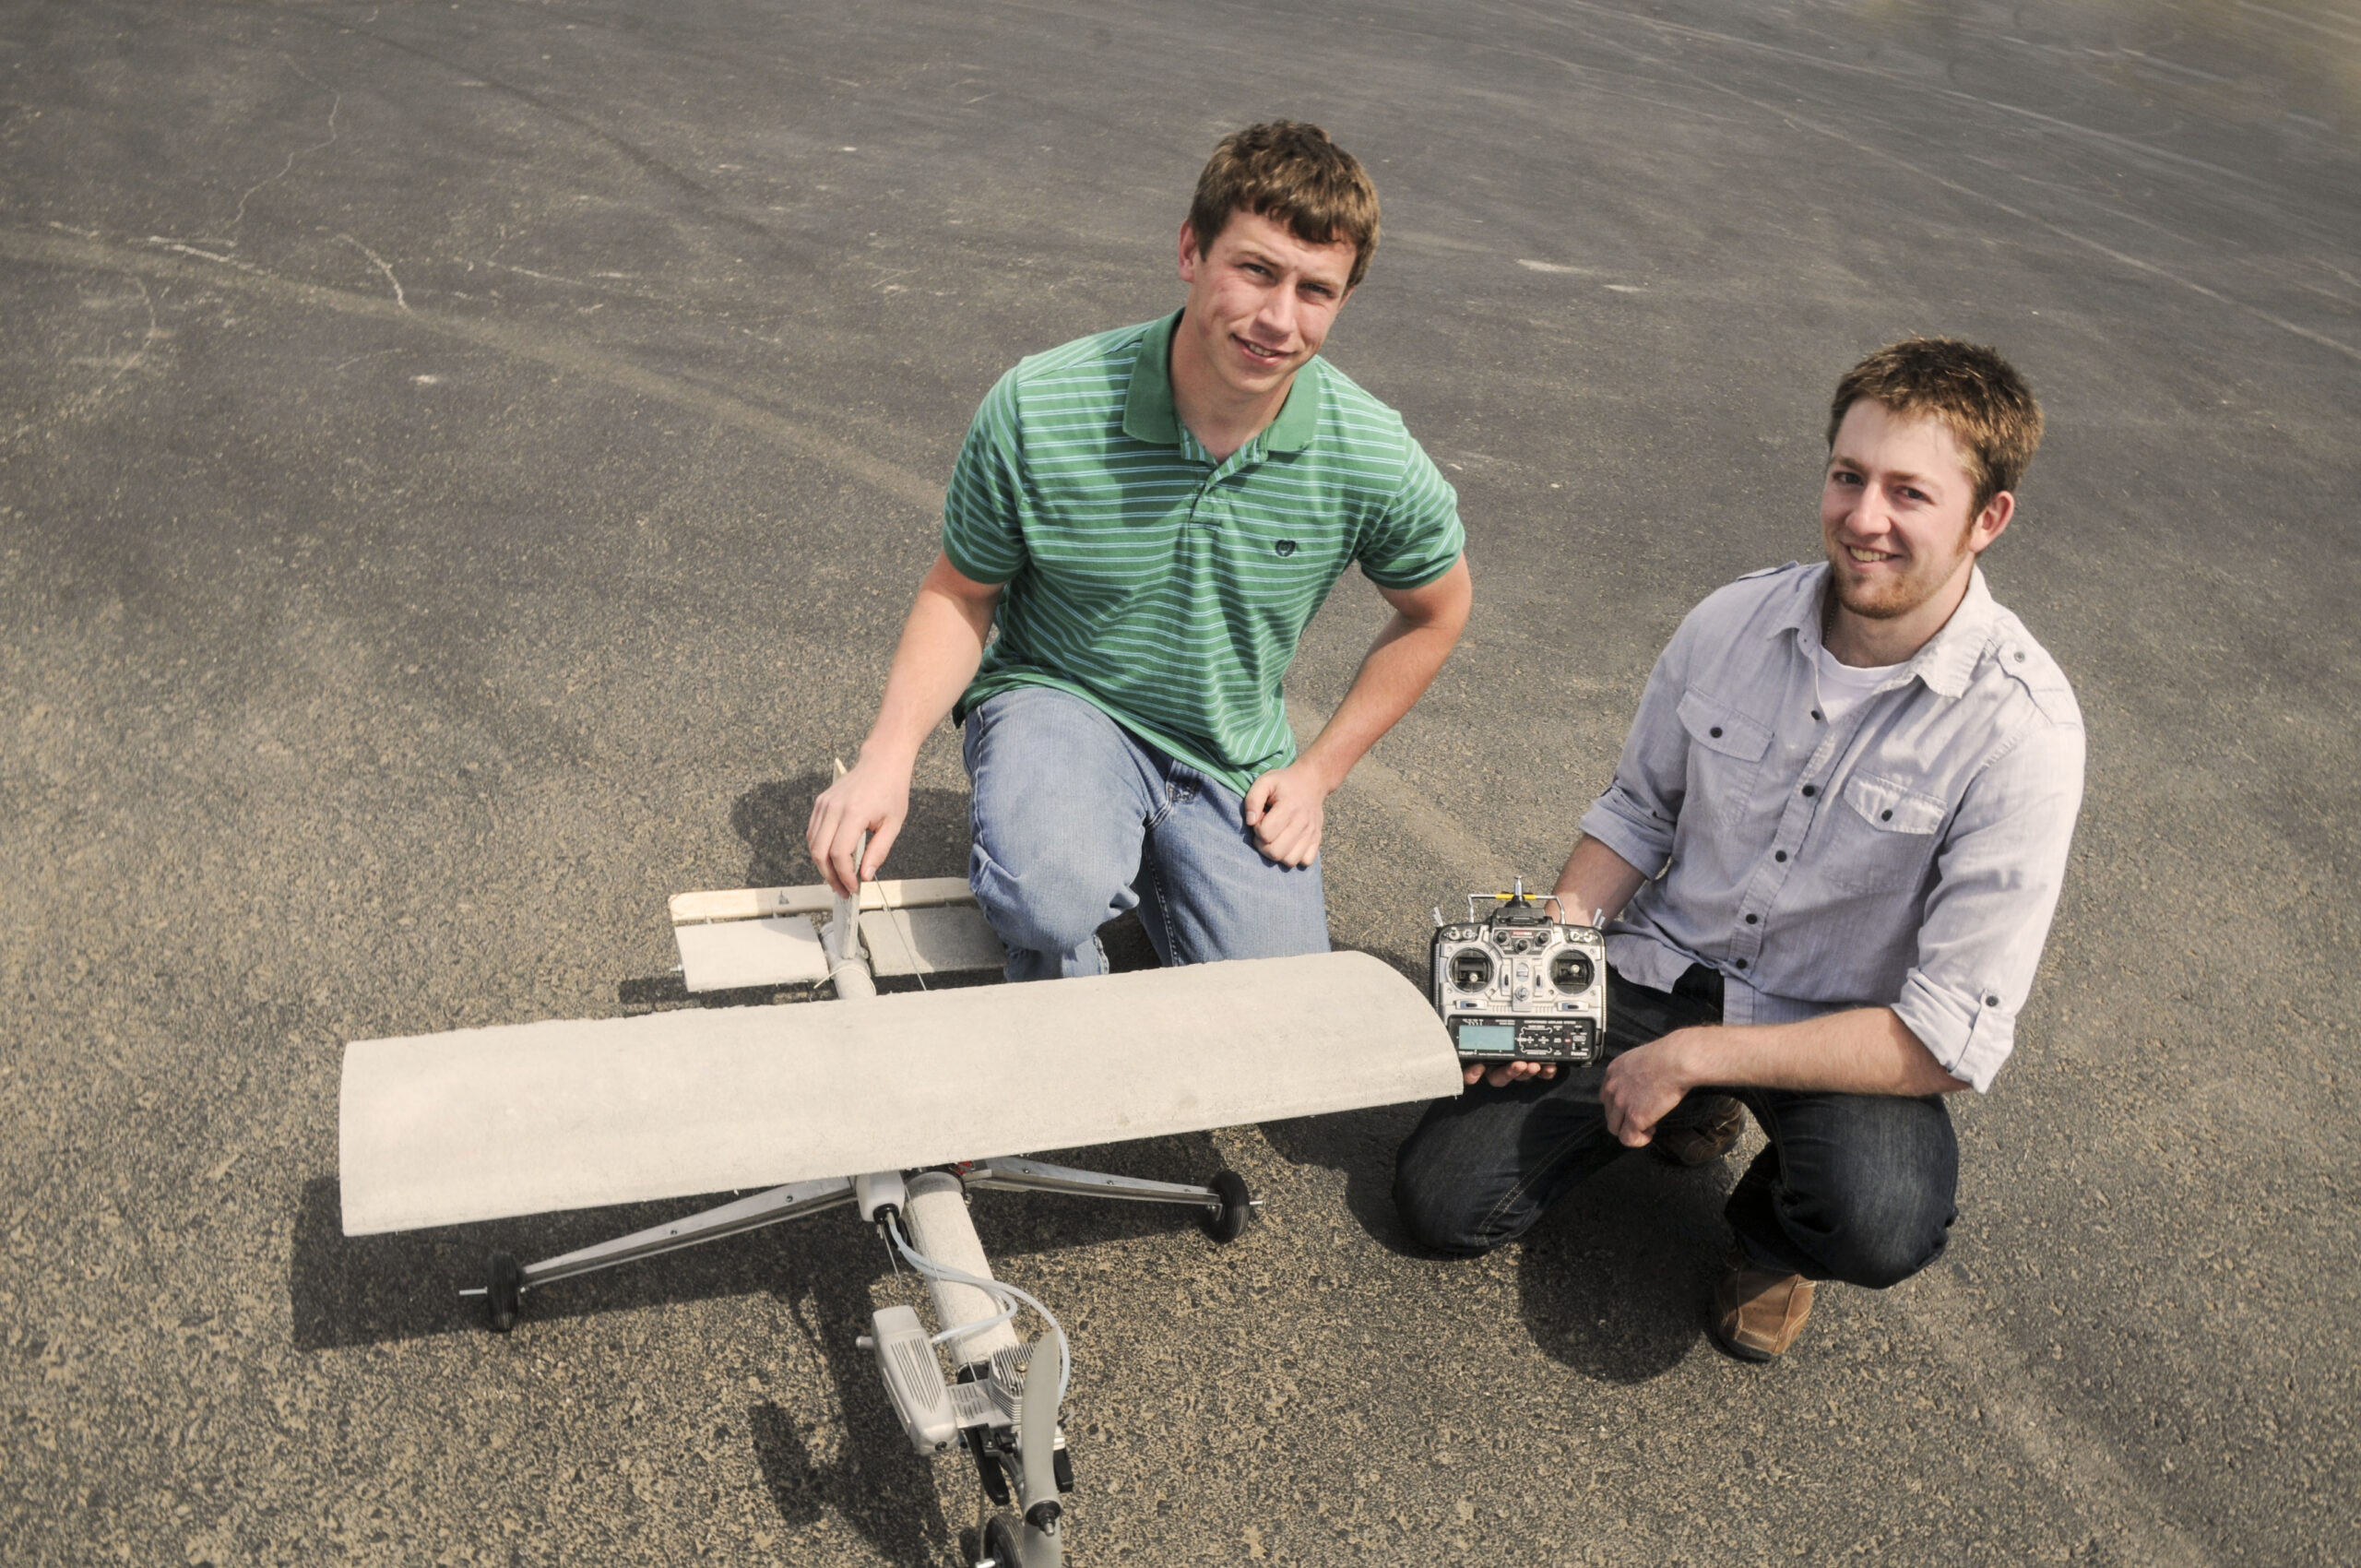 College Students Make First-Ever Successful Flight And Landing Of A Concrete Airplane